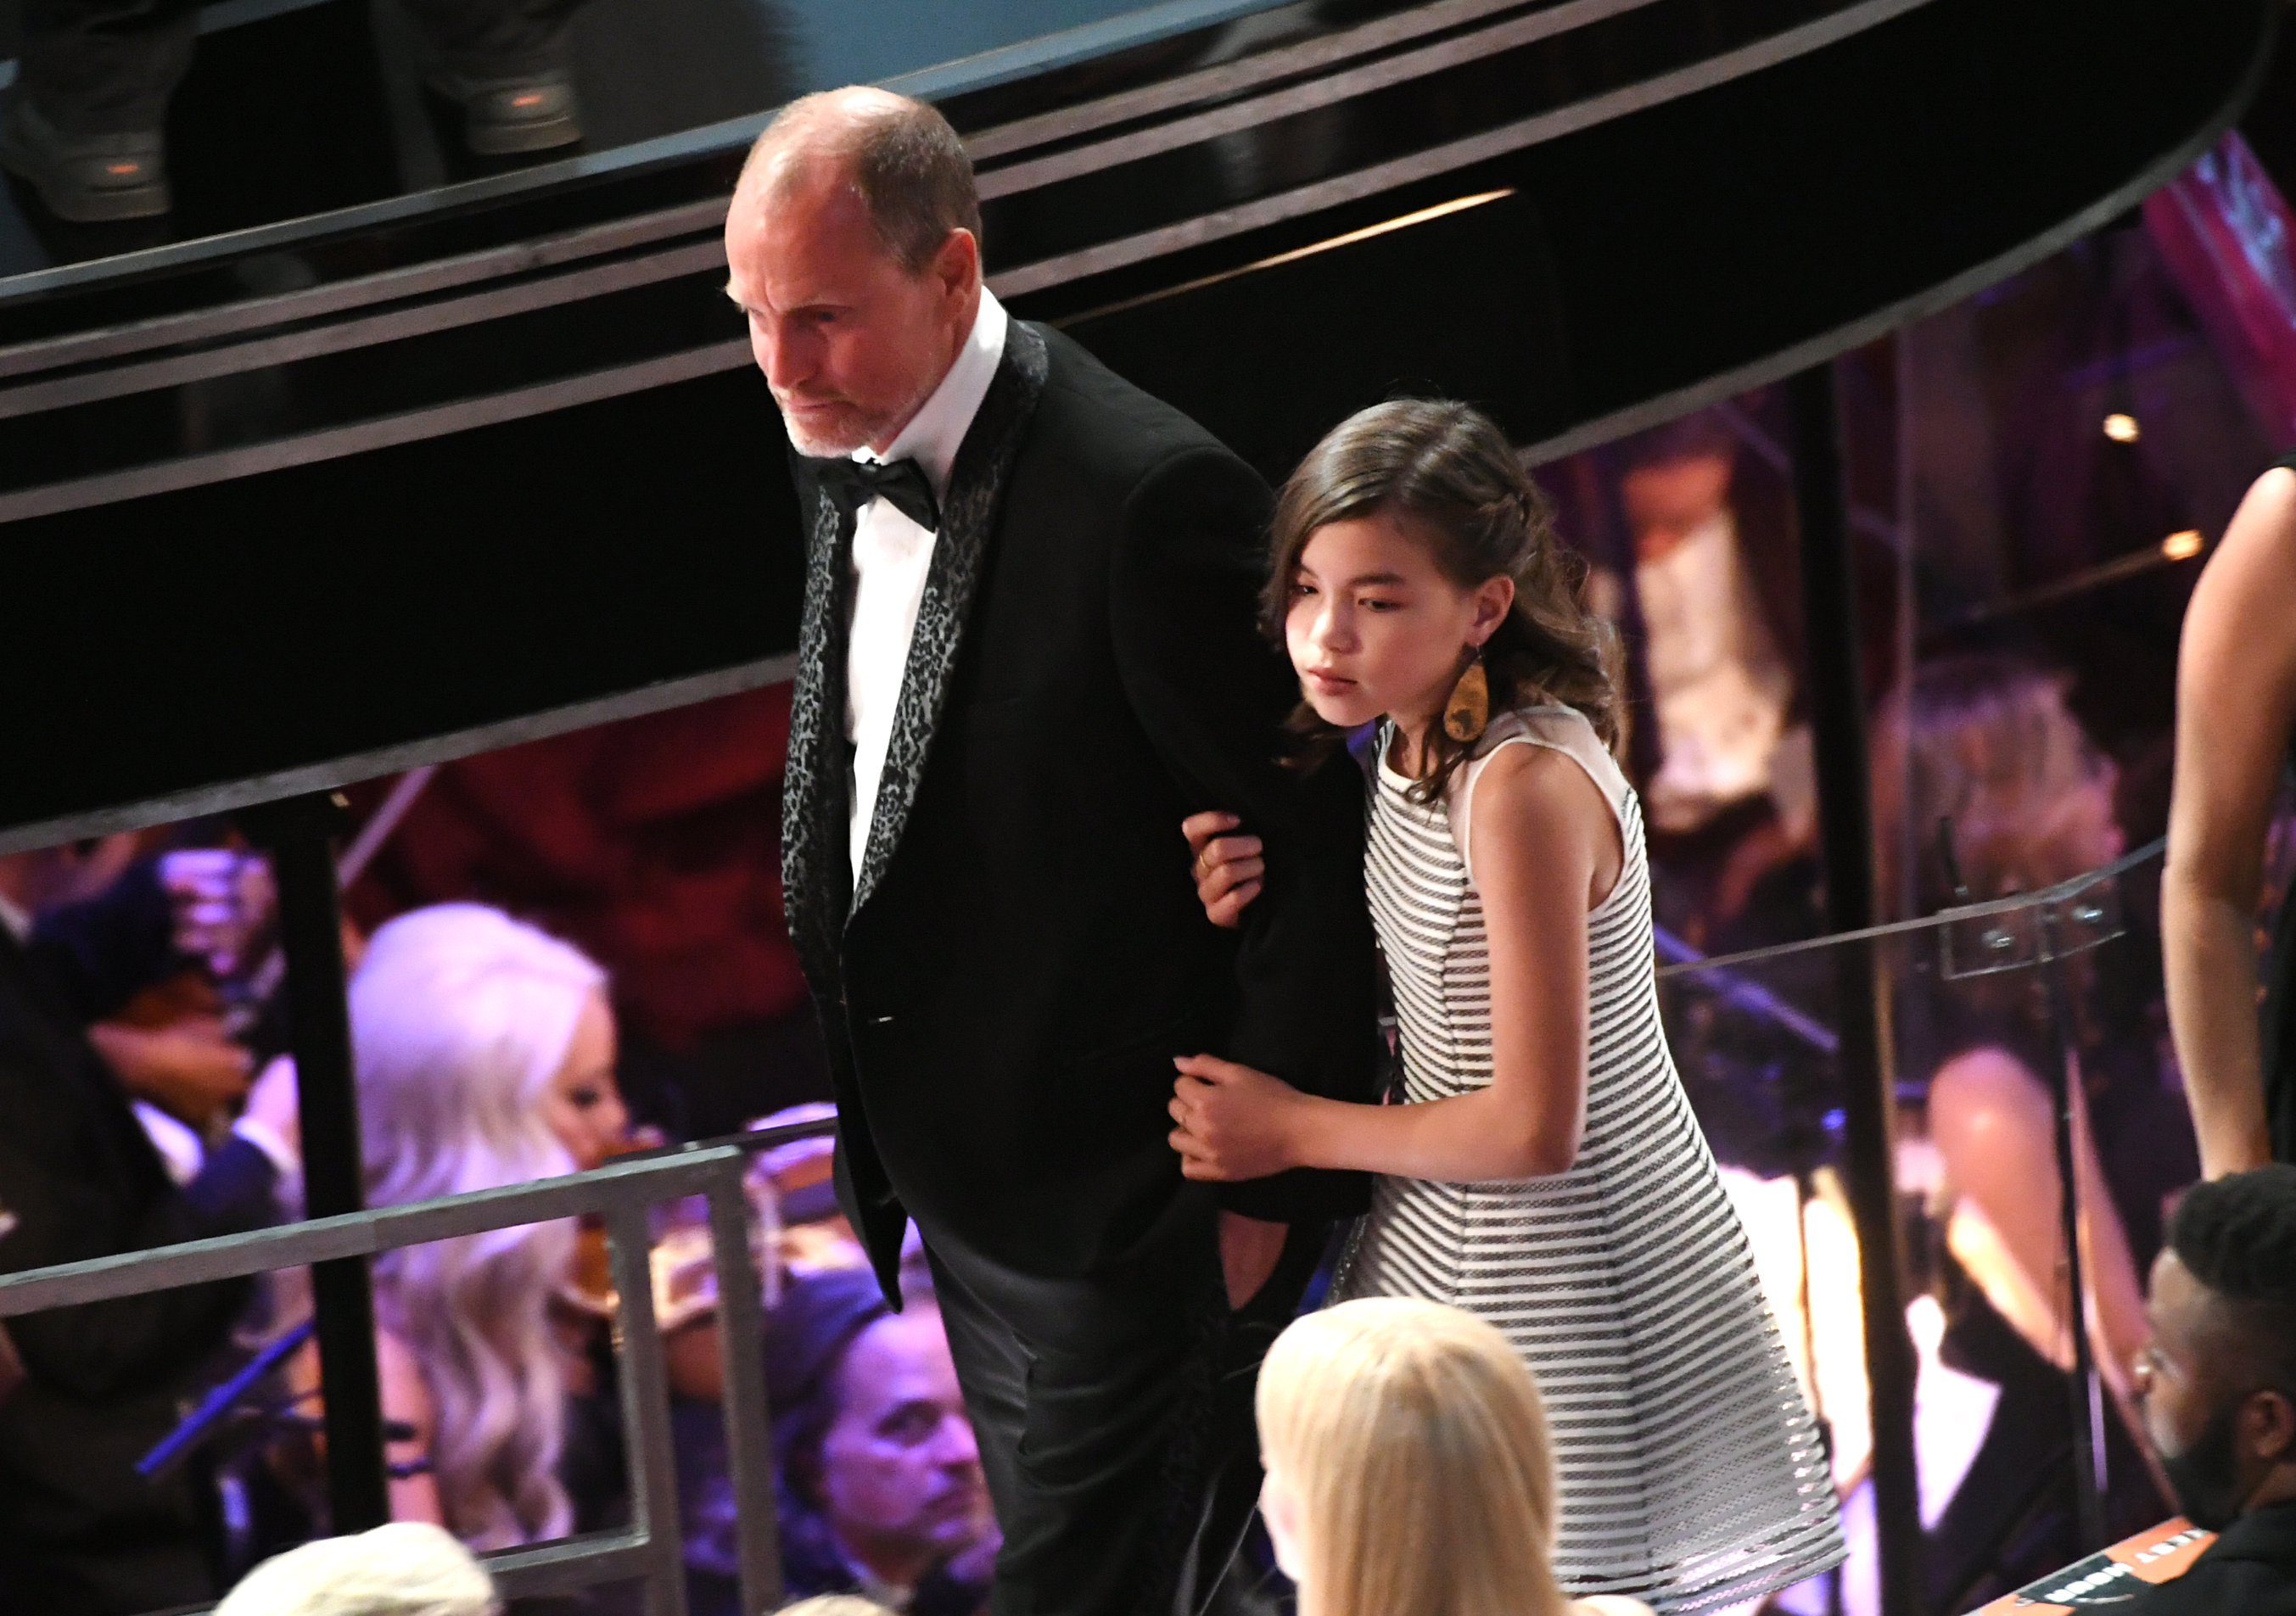 Woody Harrelson and Makani Harrelson during the 90th Annual Academy Awards at the Dolby Theatre at Hollywood & Highland Center on March 4, 2018 in Hollywood, California. | Source: Getty Images